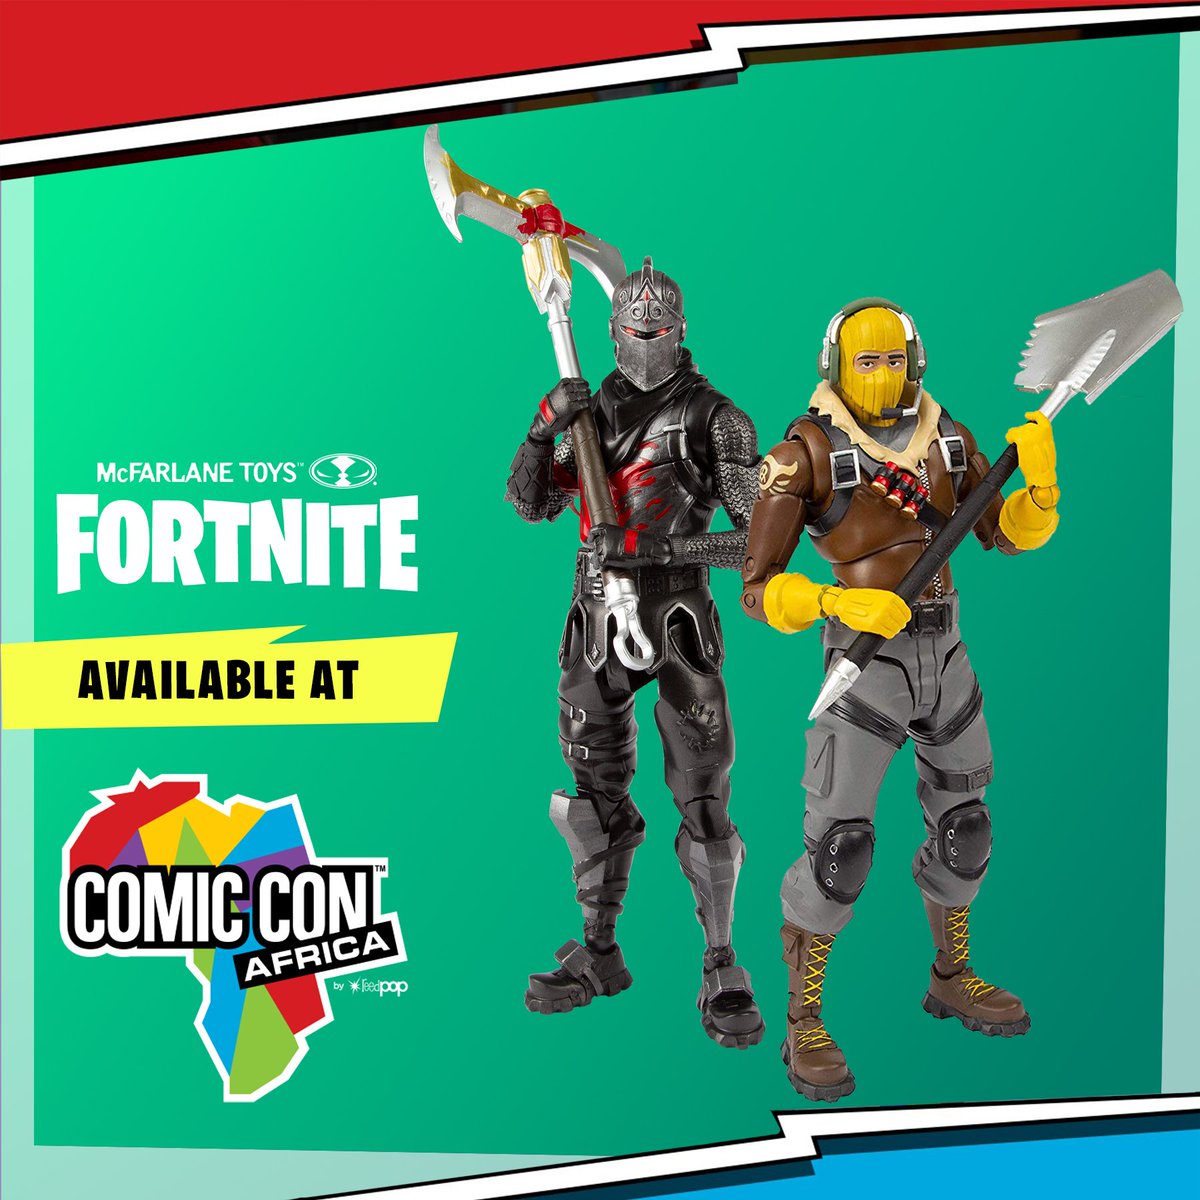 Comic Con Africa On Twitter We Re Excited To Announce That The Fortnite Premium Action Figures By Mcfarlane Toys And Epic Games Will Be On Display And Available At Comicconafrica Visit Them At